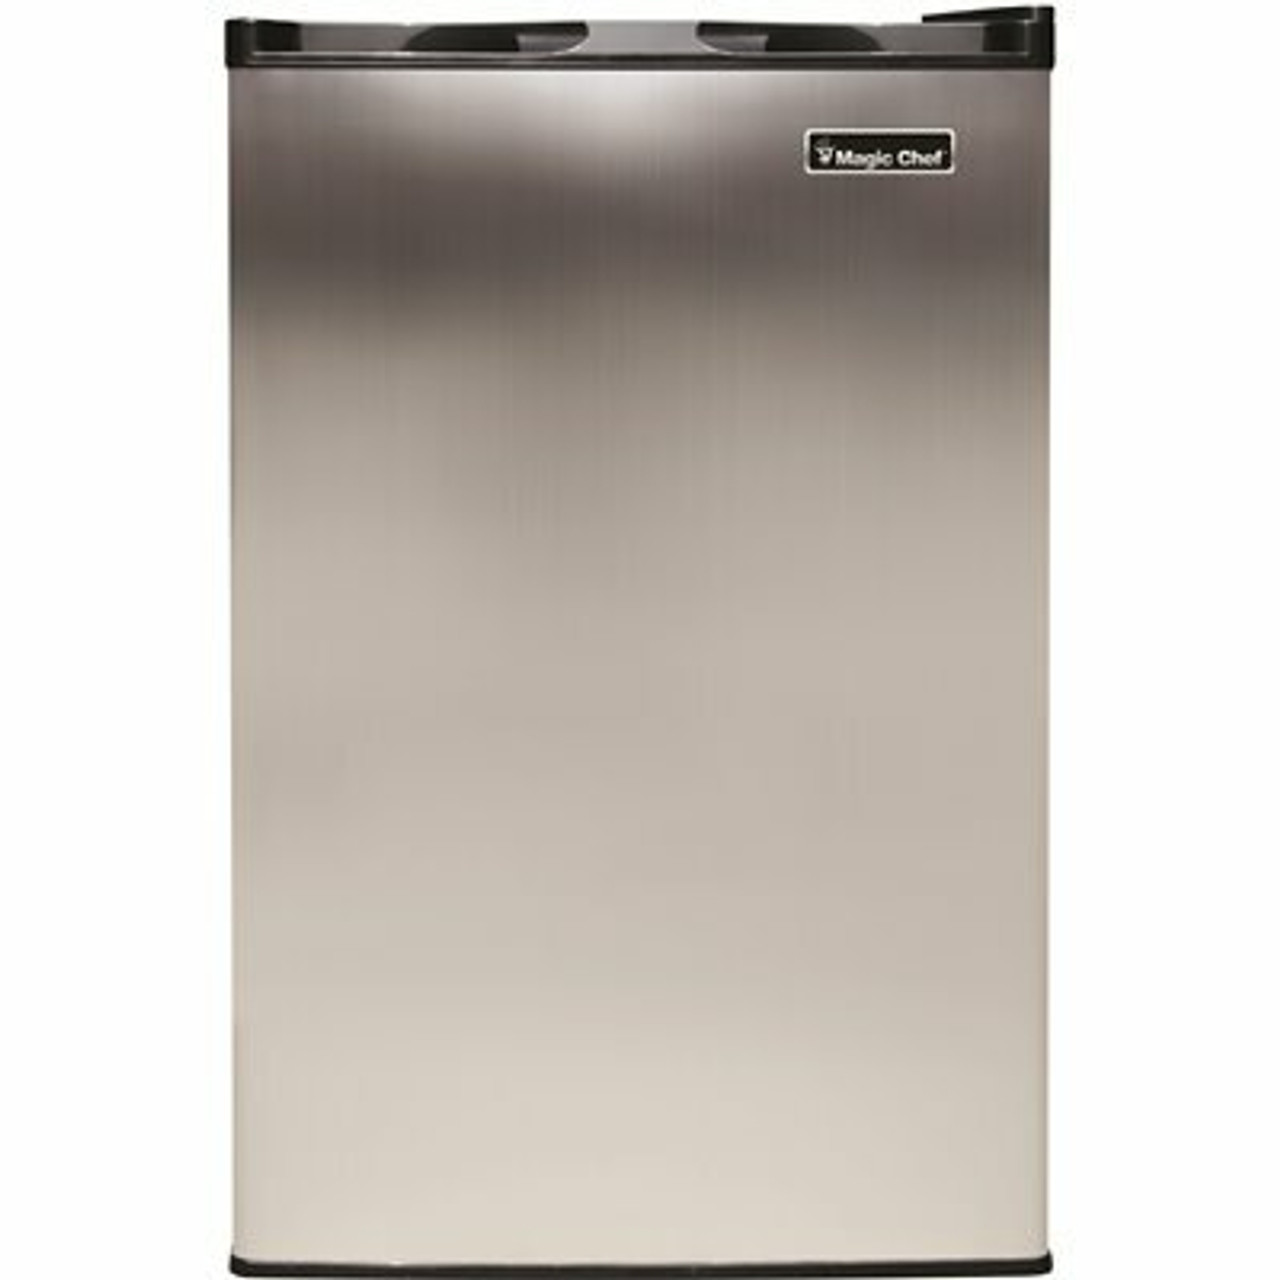 Magic Chef 3.0 Cu. Ft. Upright Freezer In Stainless Steel